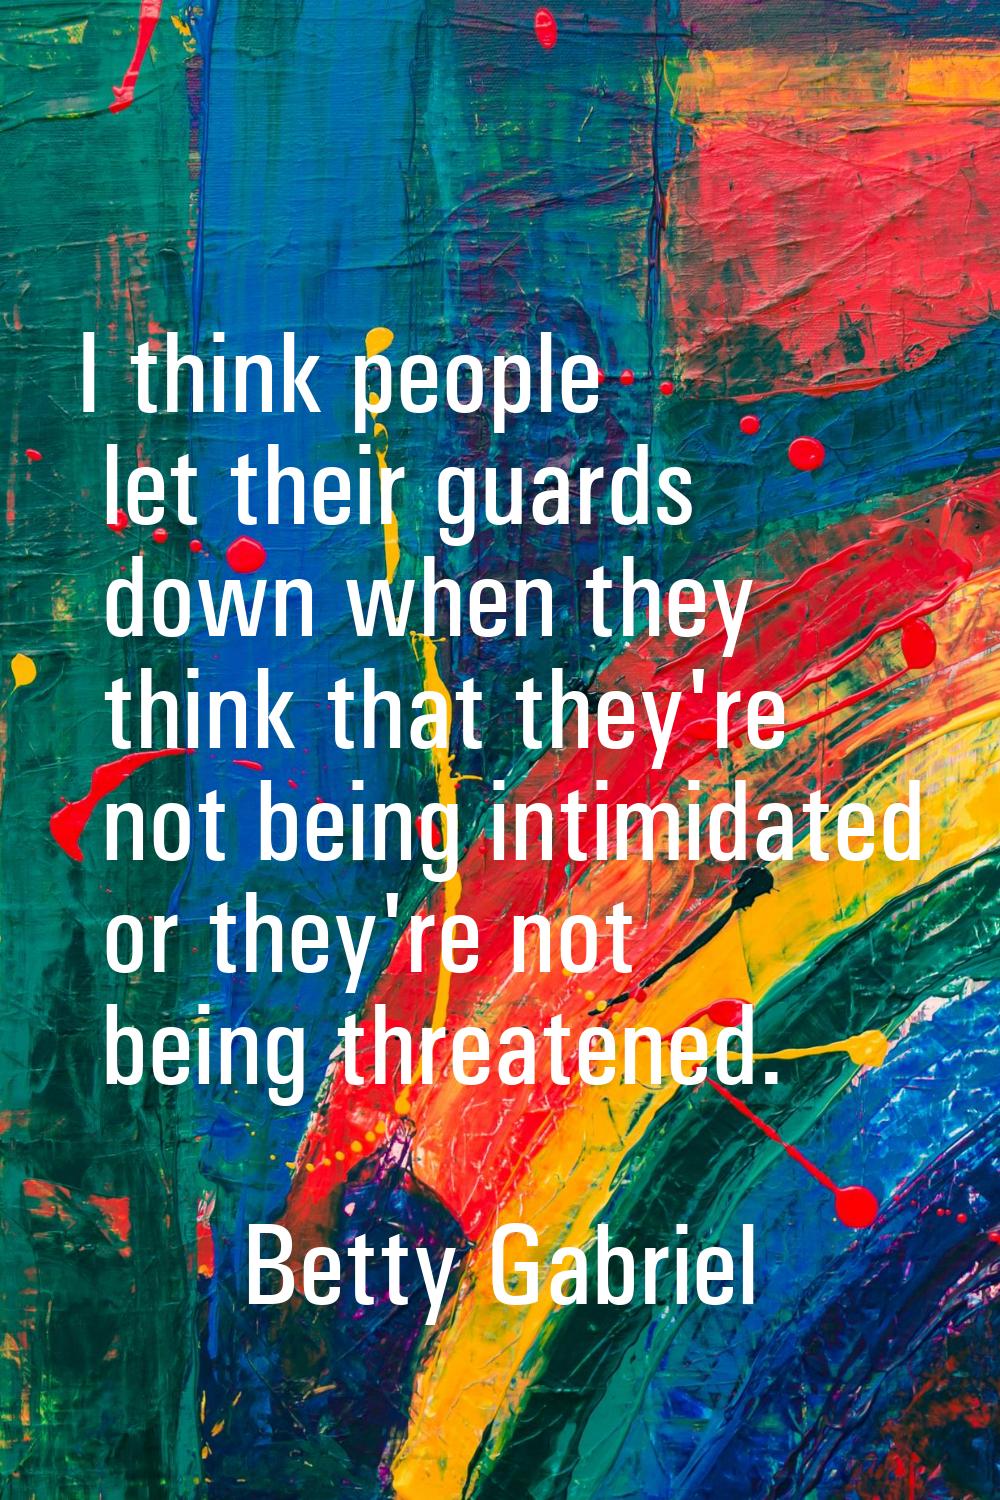 I think people let their guards down when they think that they're not being intimidated or they're 